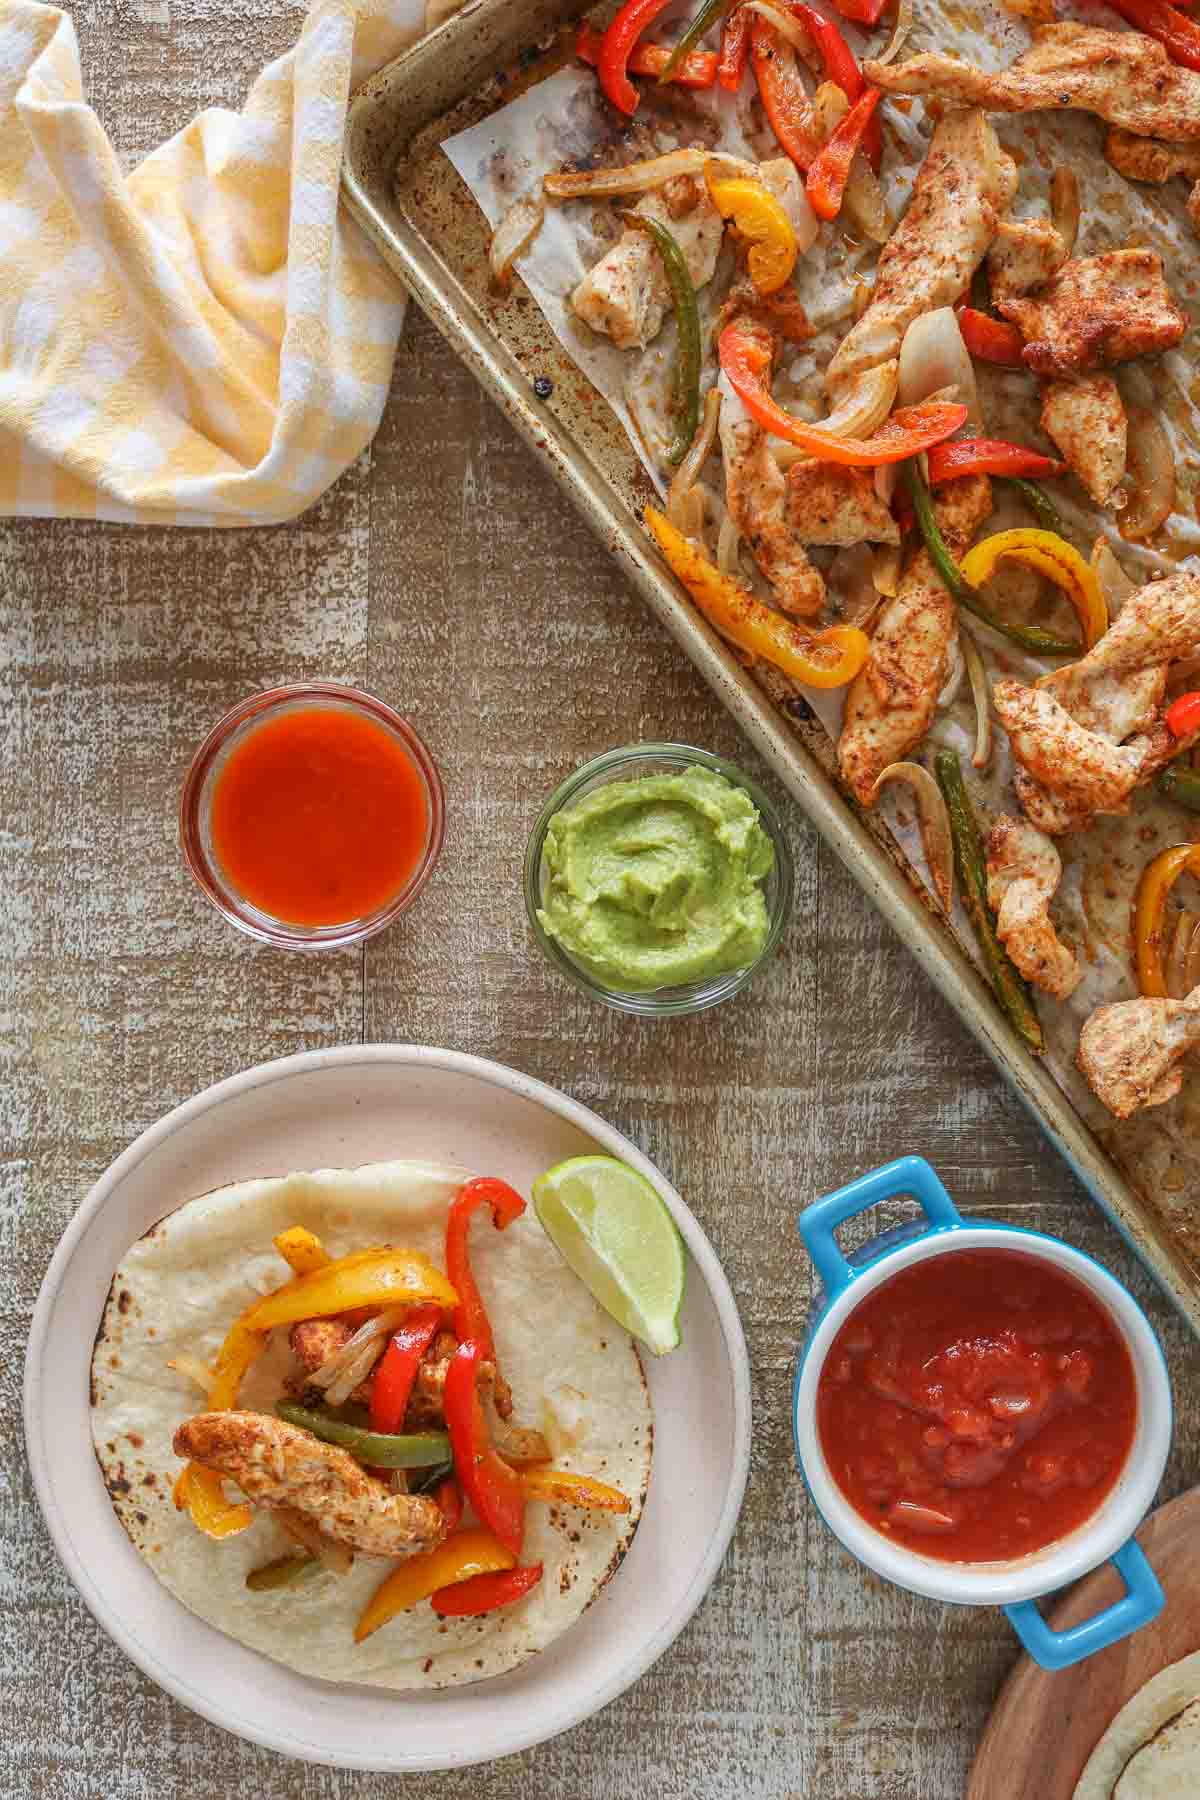 Chicken fajita on a plate next to toppings and a sheet pan with some of the chicken fajita mixture.